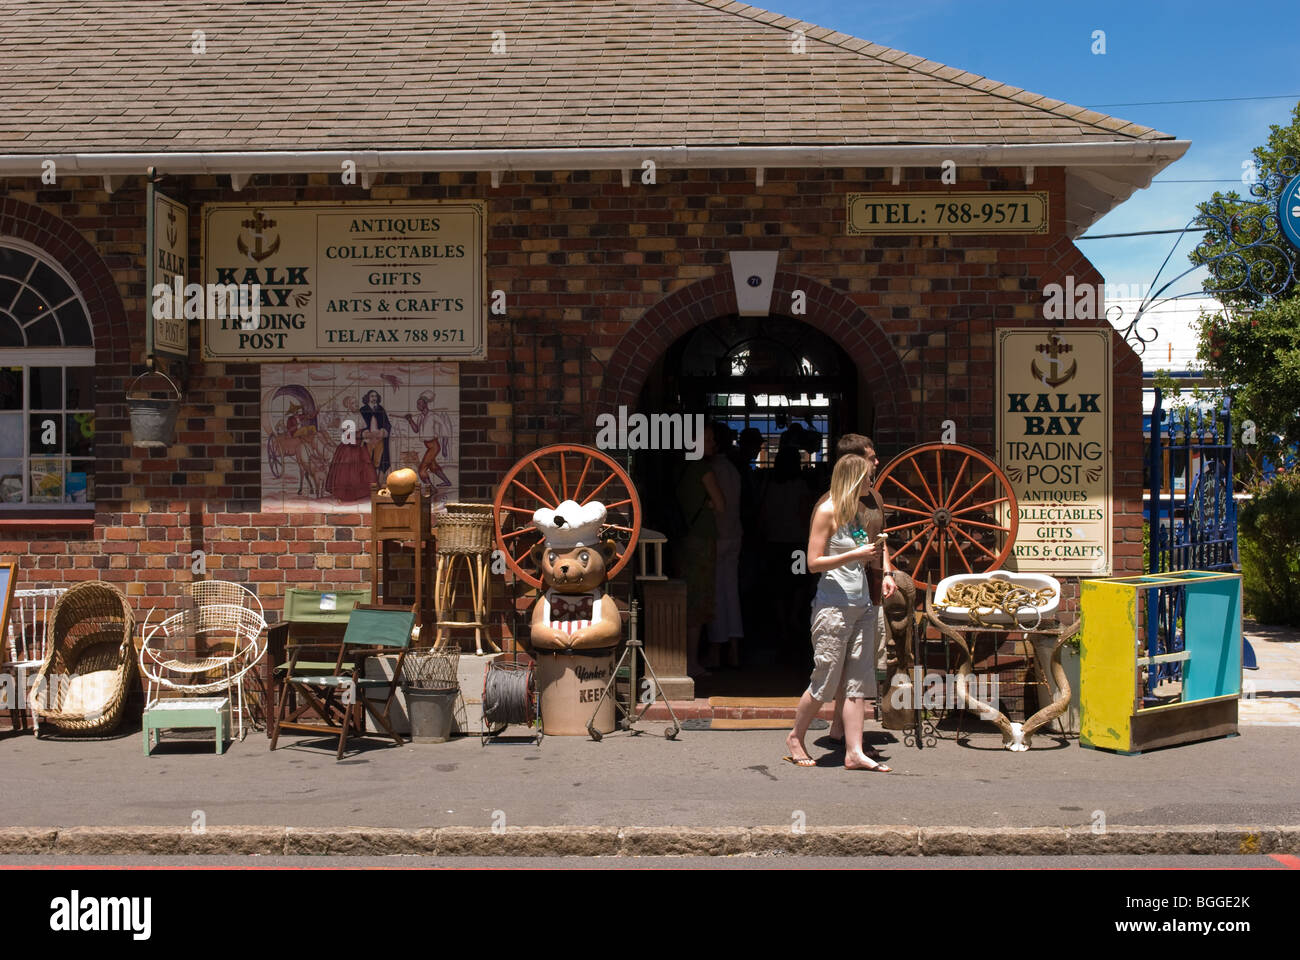 The Trading Post in Kalk Bay, in the Western Cape, South Africa. Stock Photo